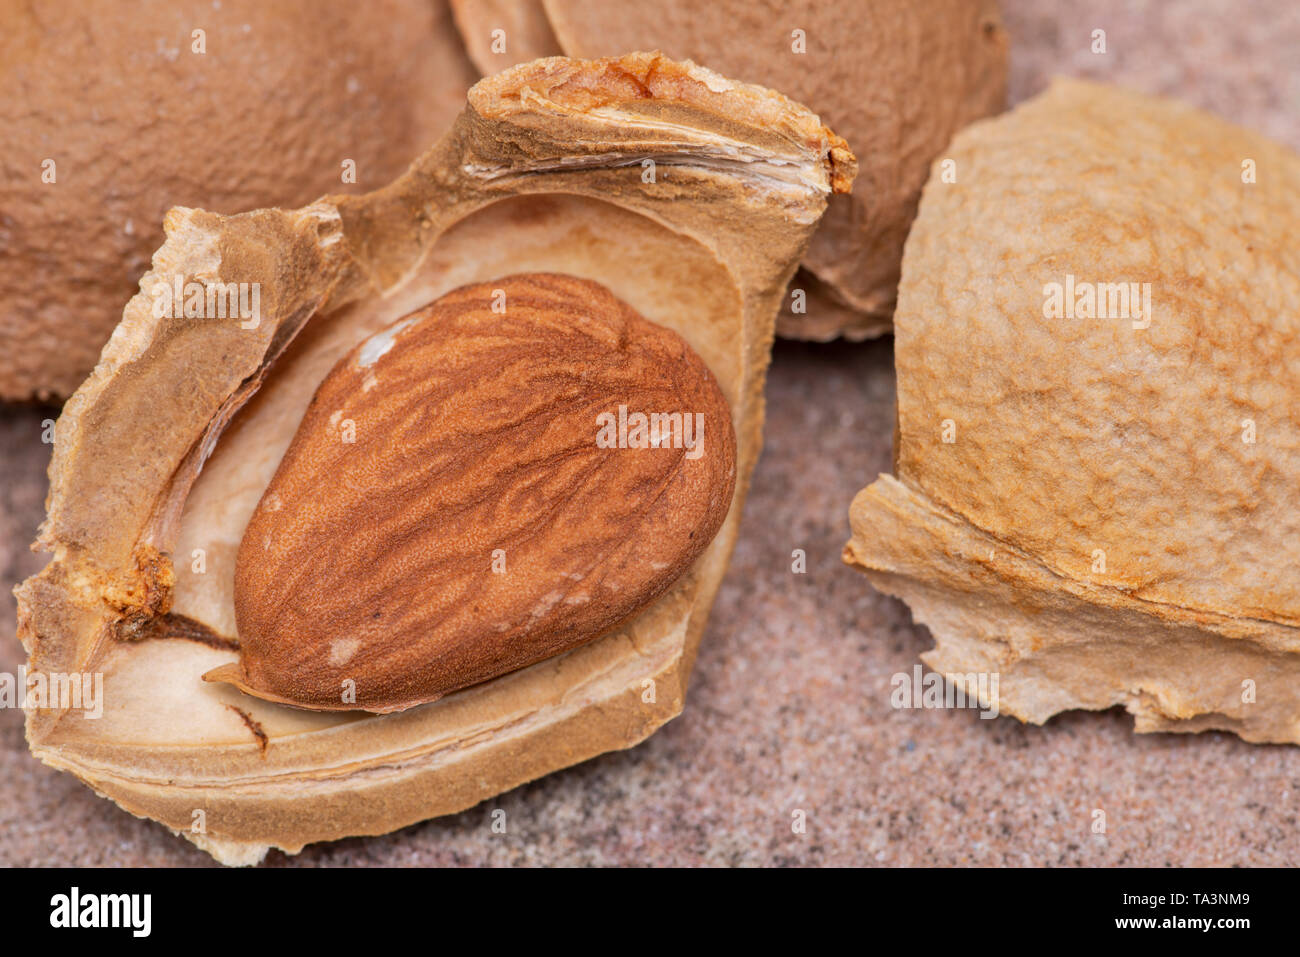 Dried Apricot Kernels (the seed of an apricot, often called a 'stone') on natural stone background. Amygdalin. Vitamin B17. Stock Photo